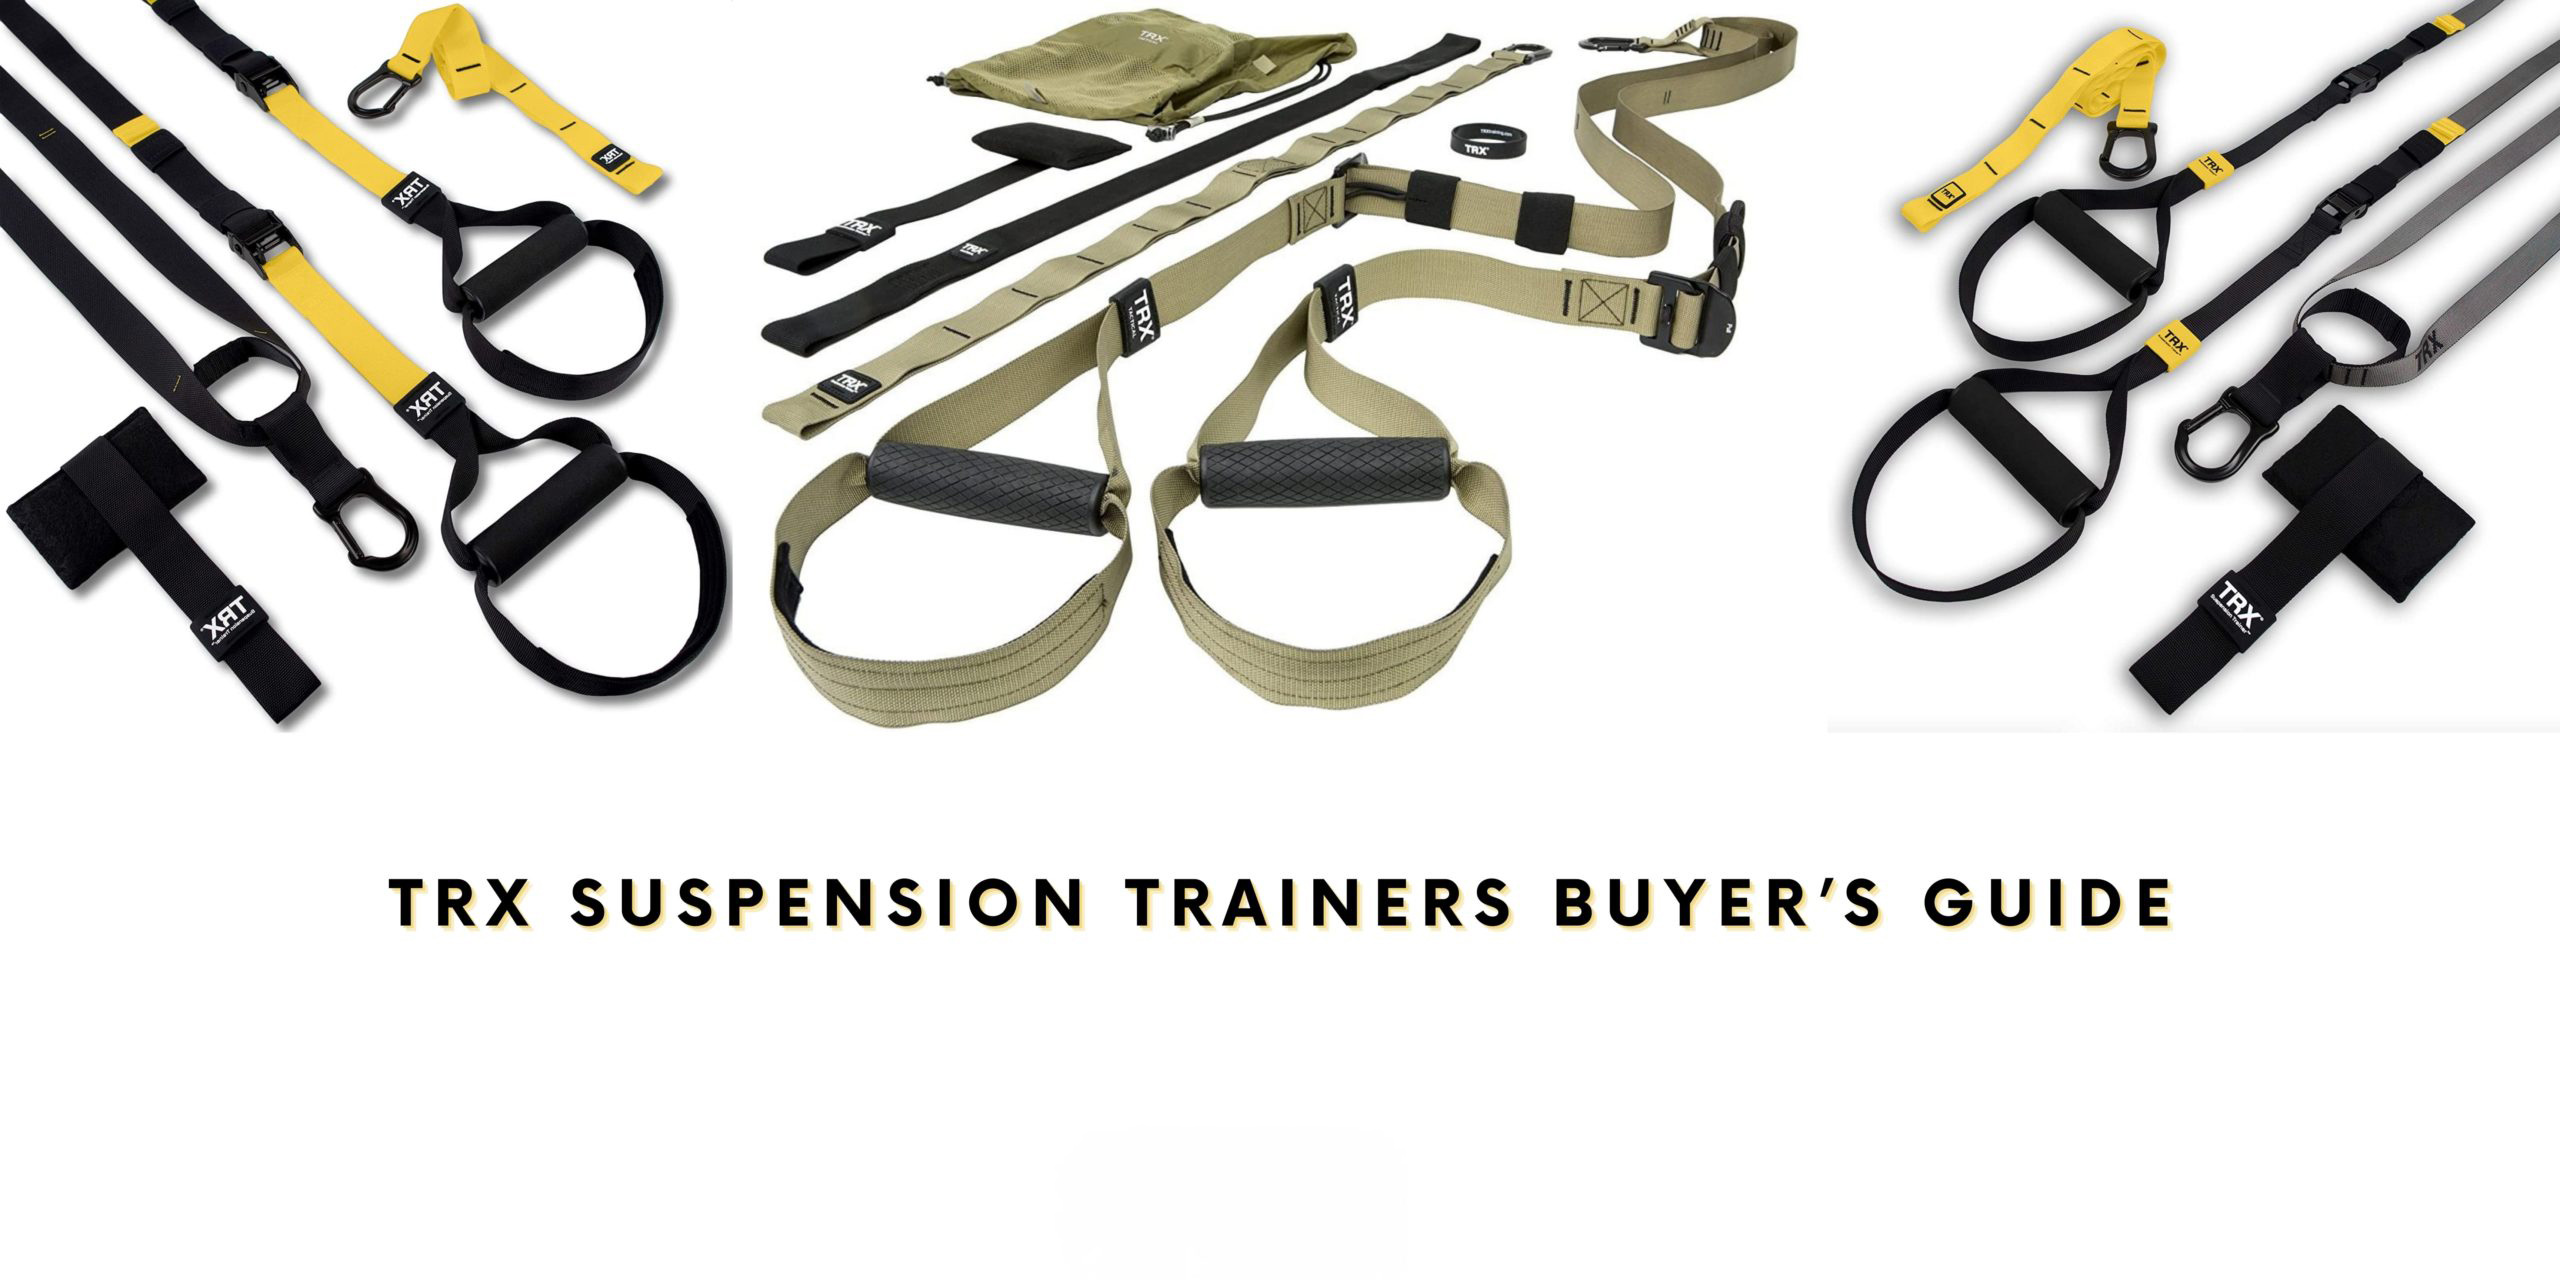 TRX-Suspension-Trainers-Buyers-Guide-scaled